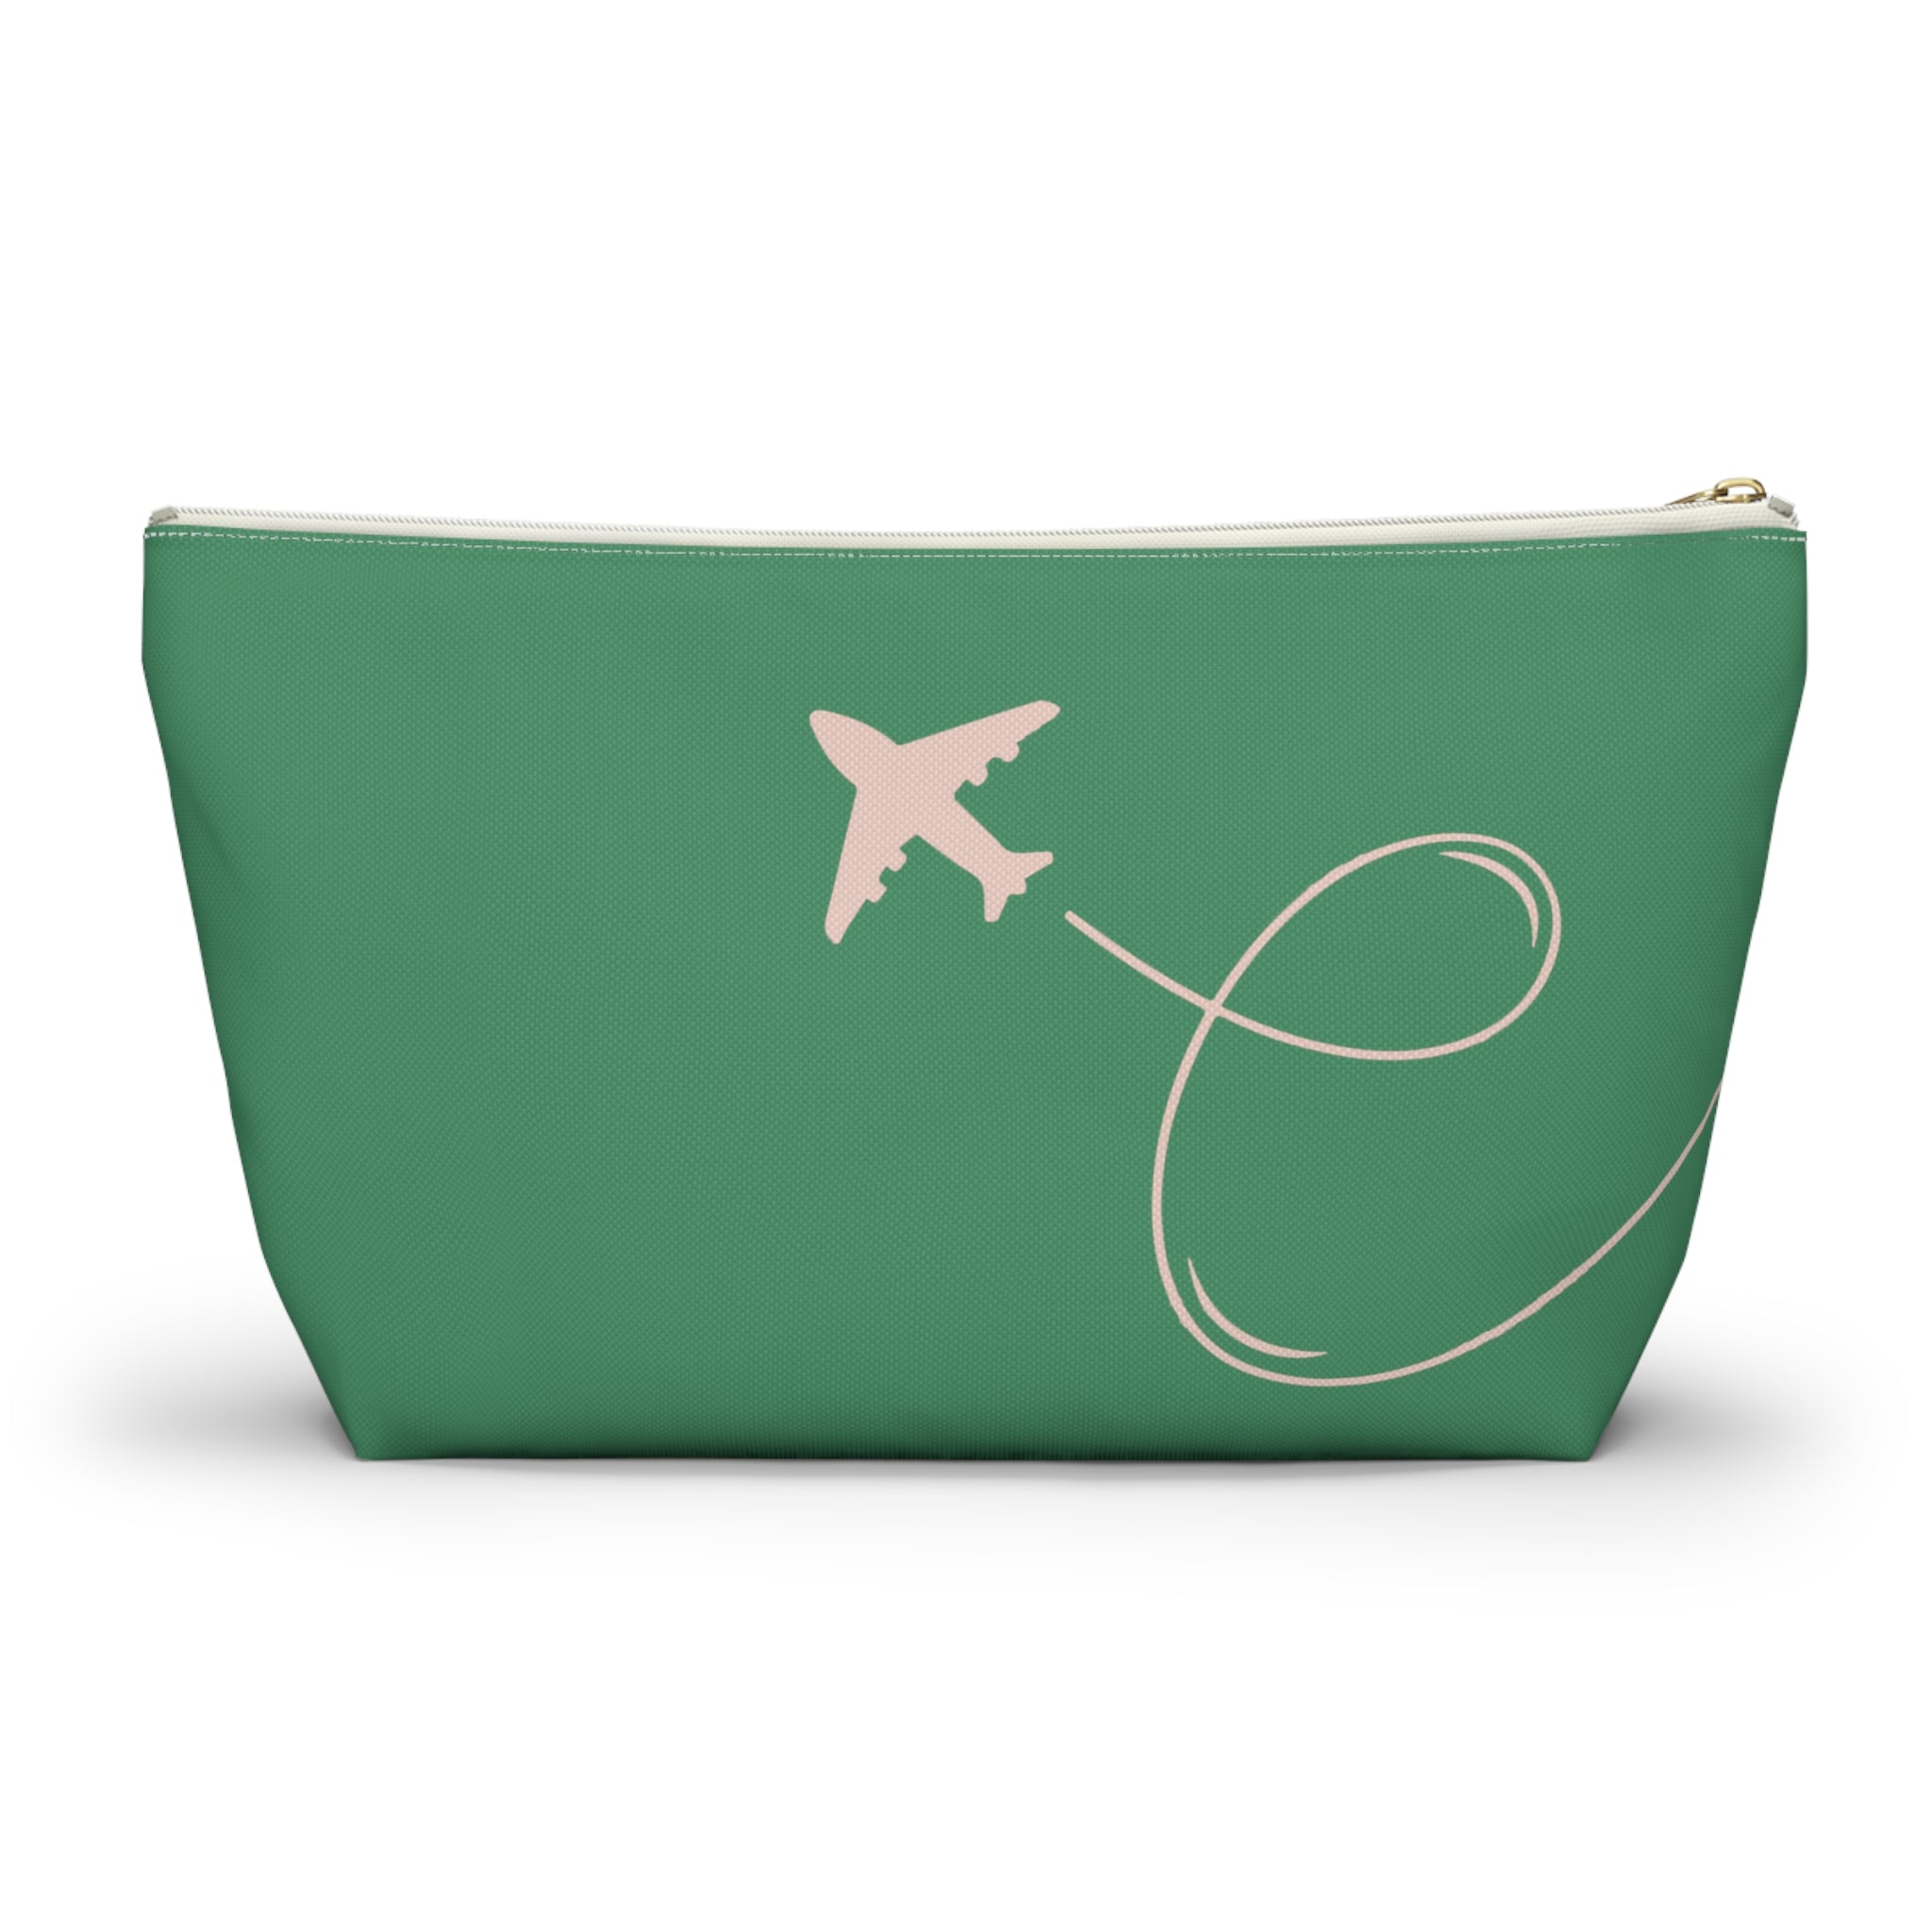 Love this journey for me Pouch (Green)